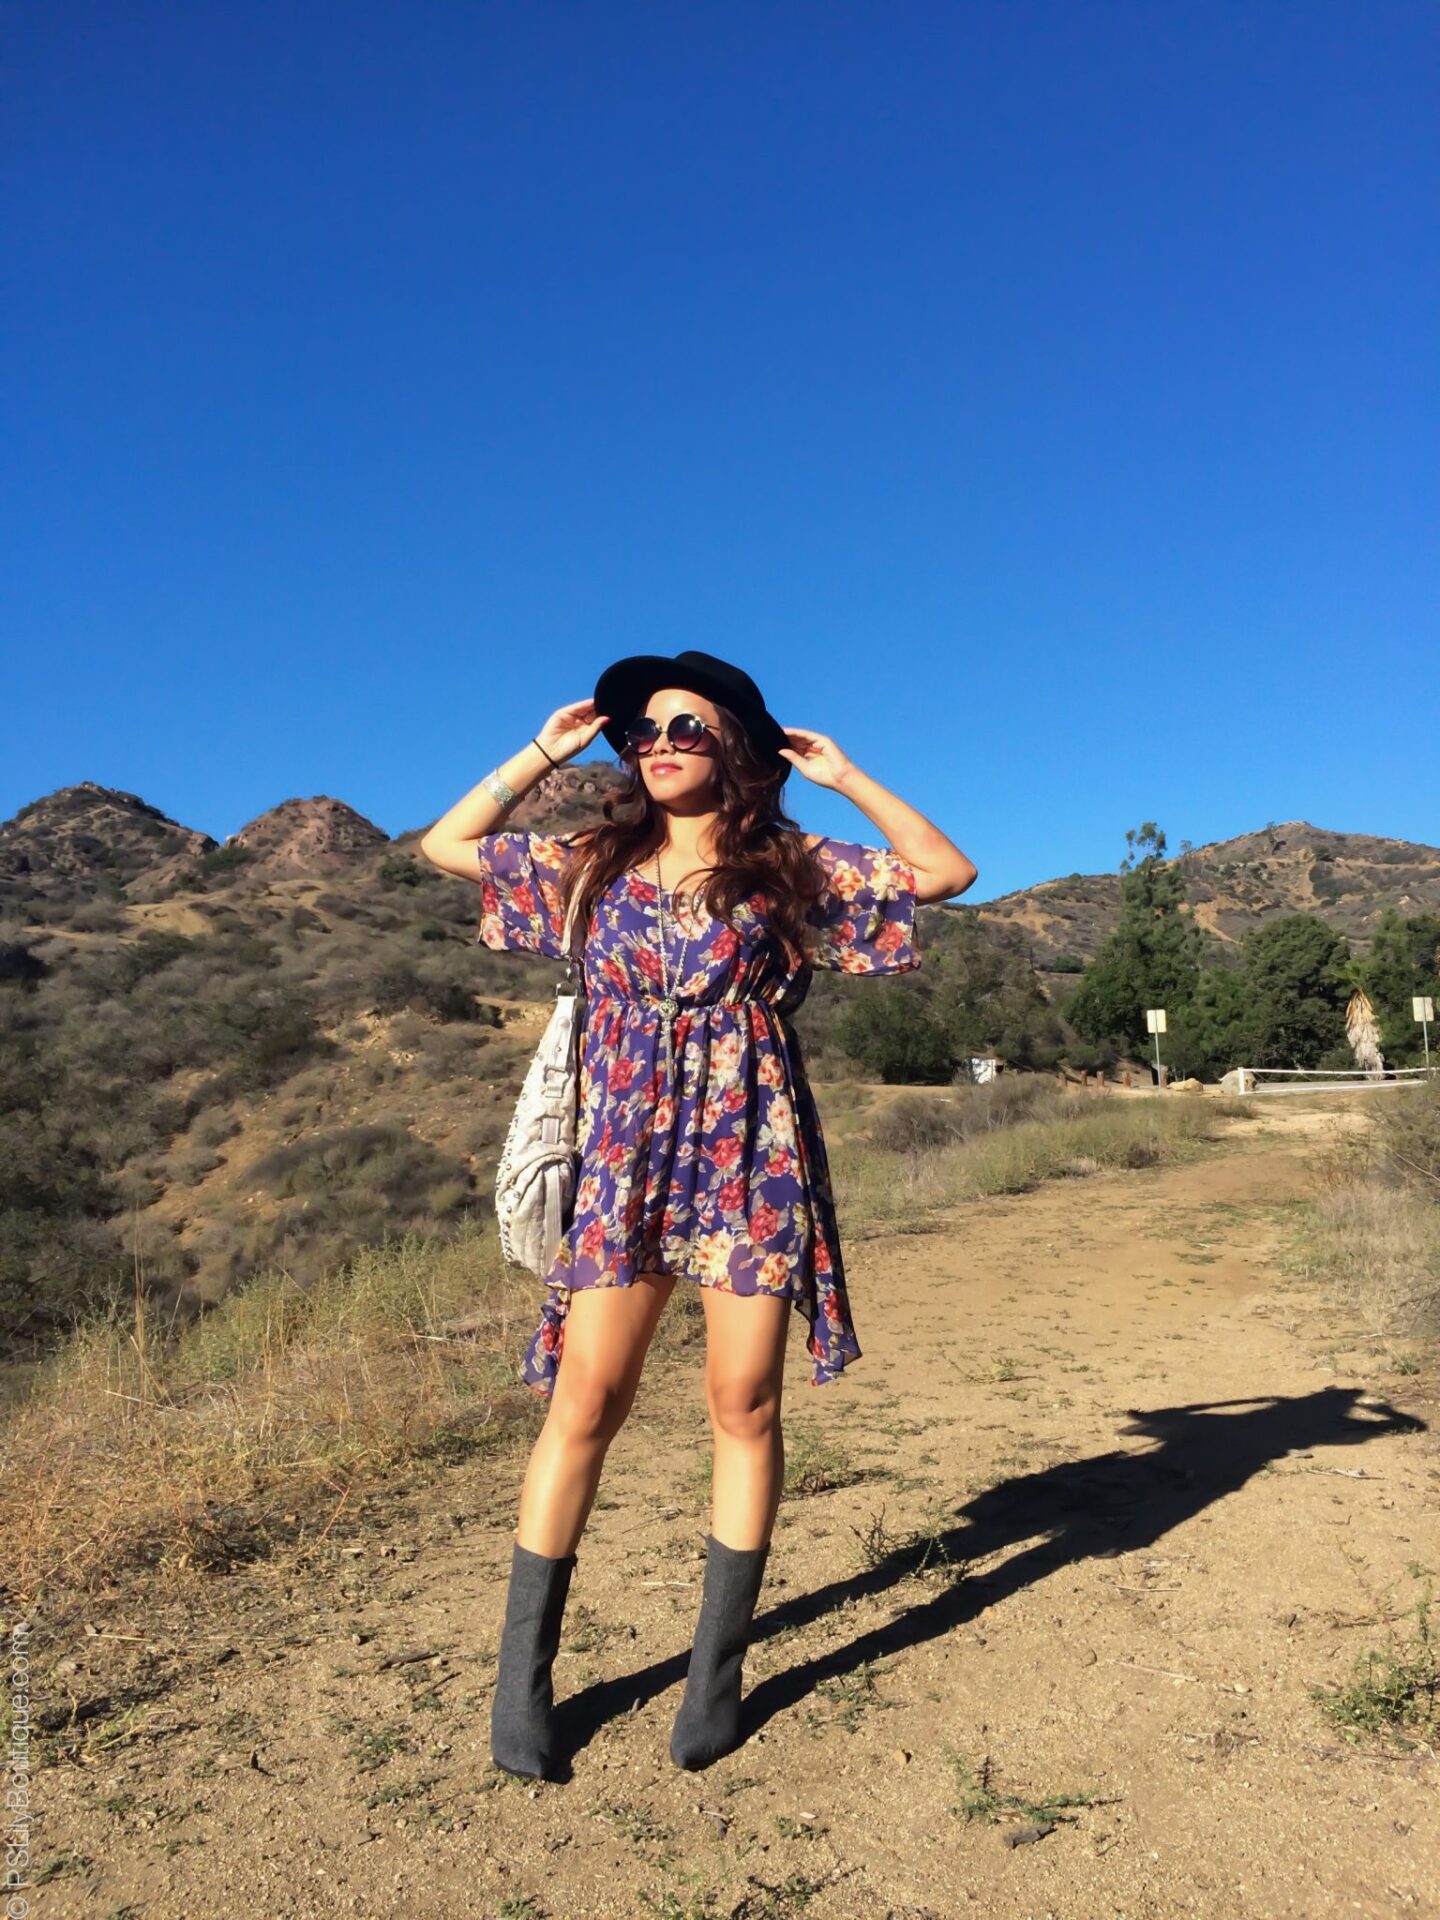 instagram-pslilyboutique-los-angeles-fashion-blogger-blog-boho-fall-2015-outfit-ideas-happy-halloween-10-31-15